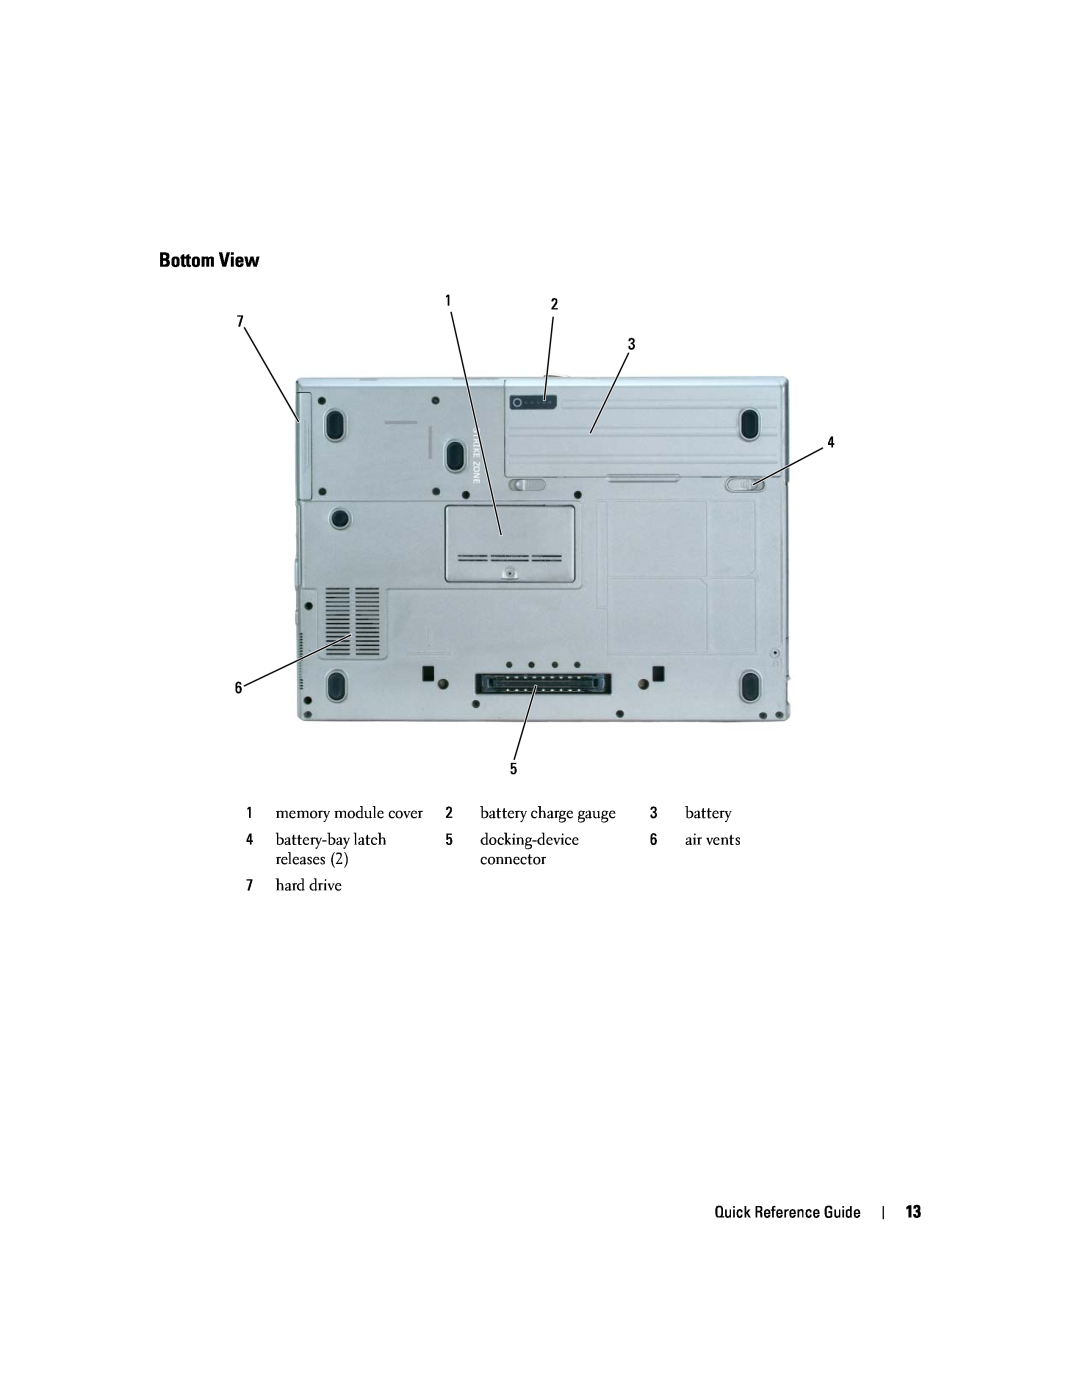 Dell D620 manual Bottom View, Quick Reference Guide 